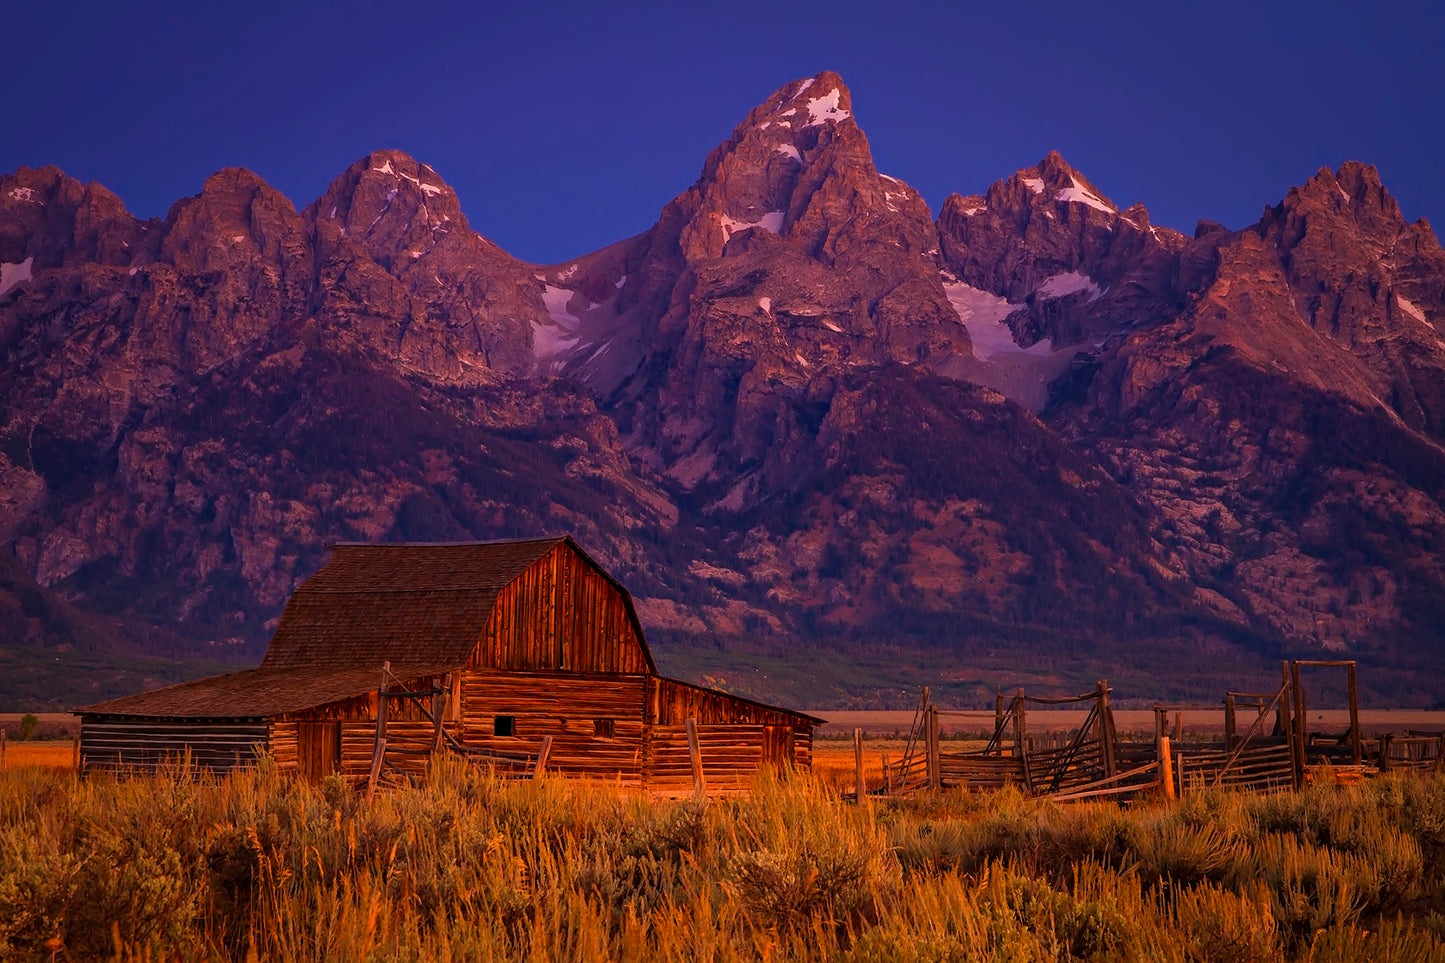 Fall morning at the famous Moulton Barn in Grand Teton National Park  Twilight, just before the sun makes an entrance